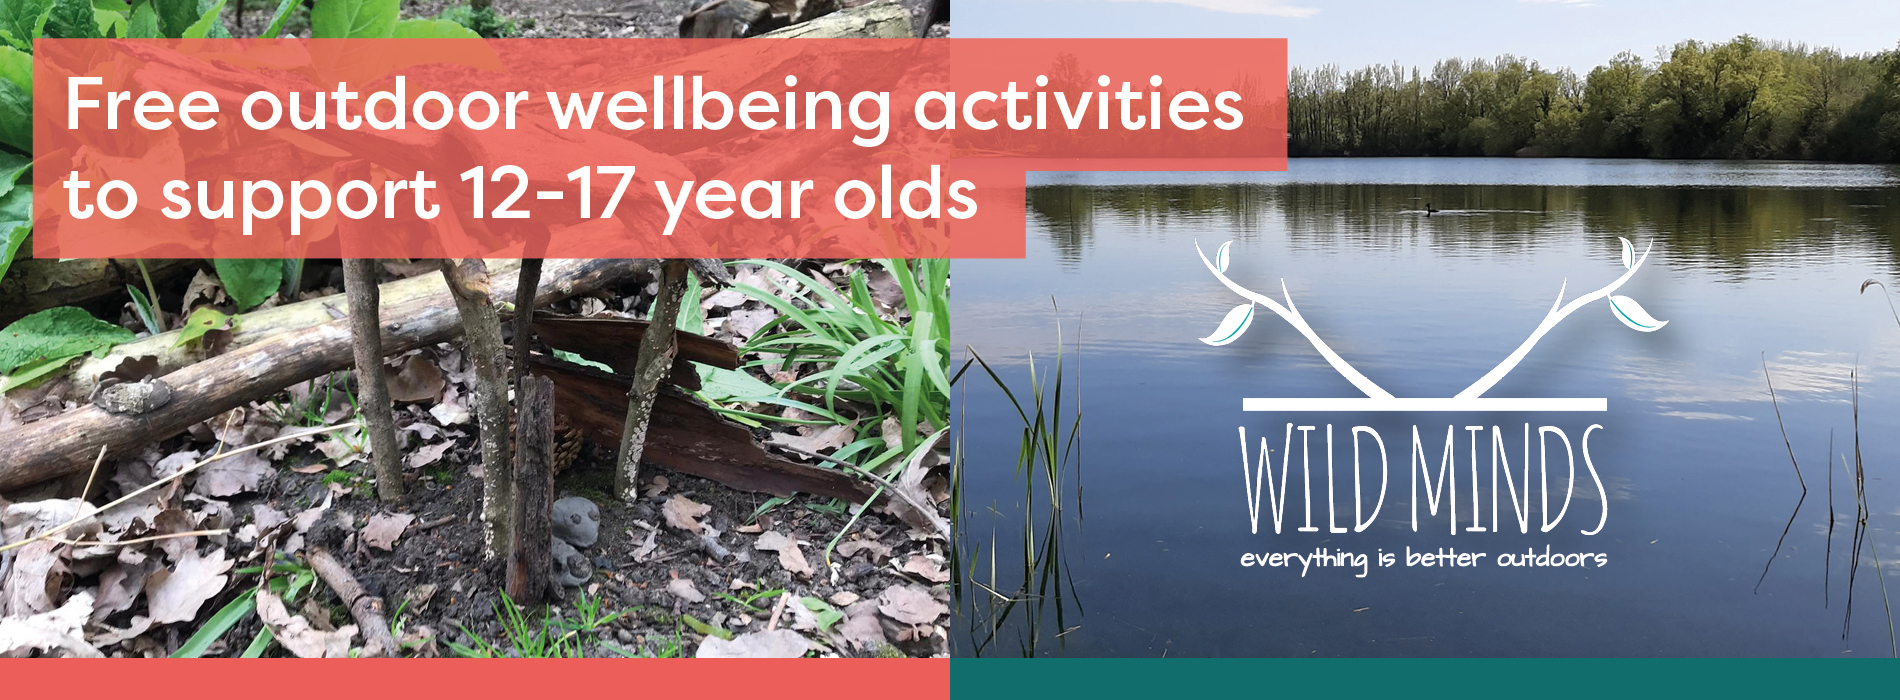 Wild Minds - outdoor activities for young people